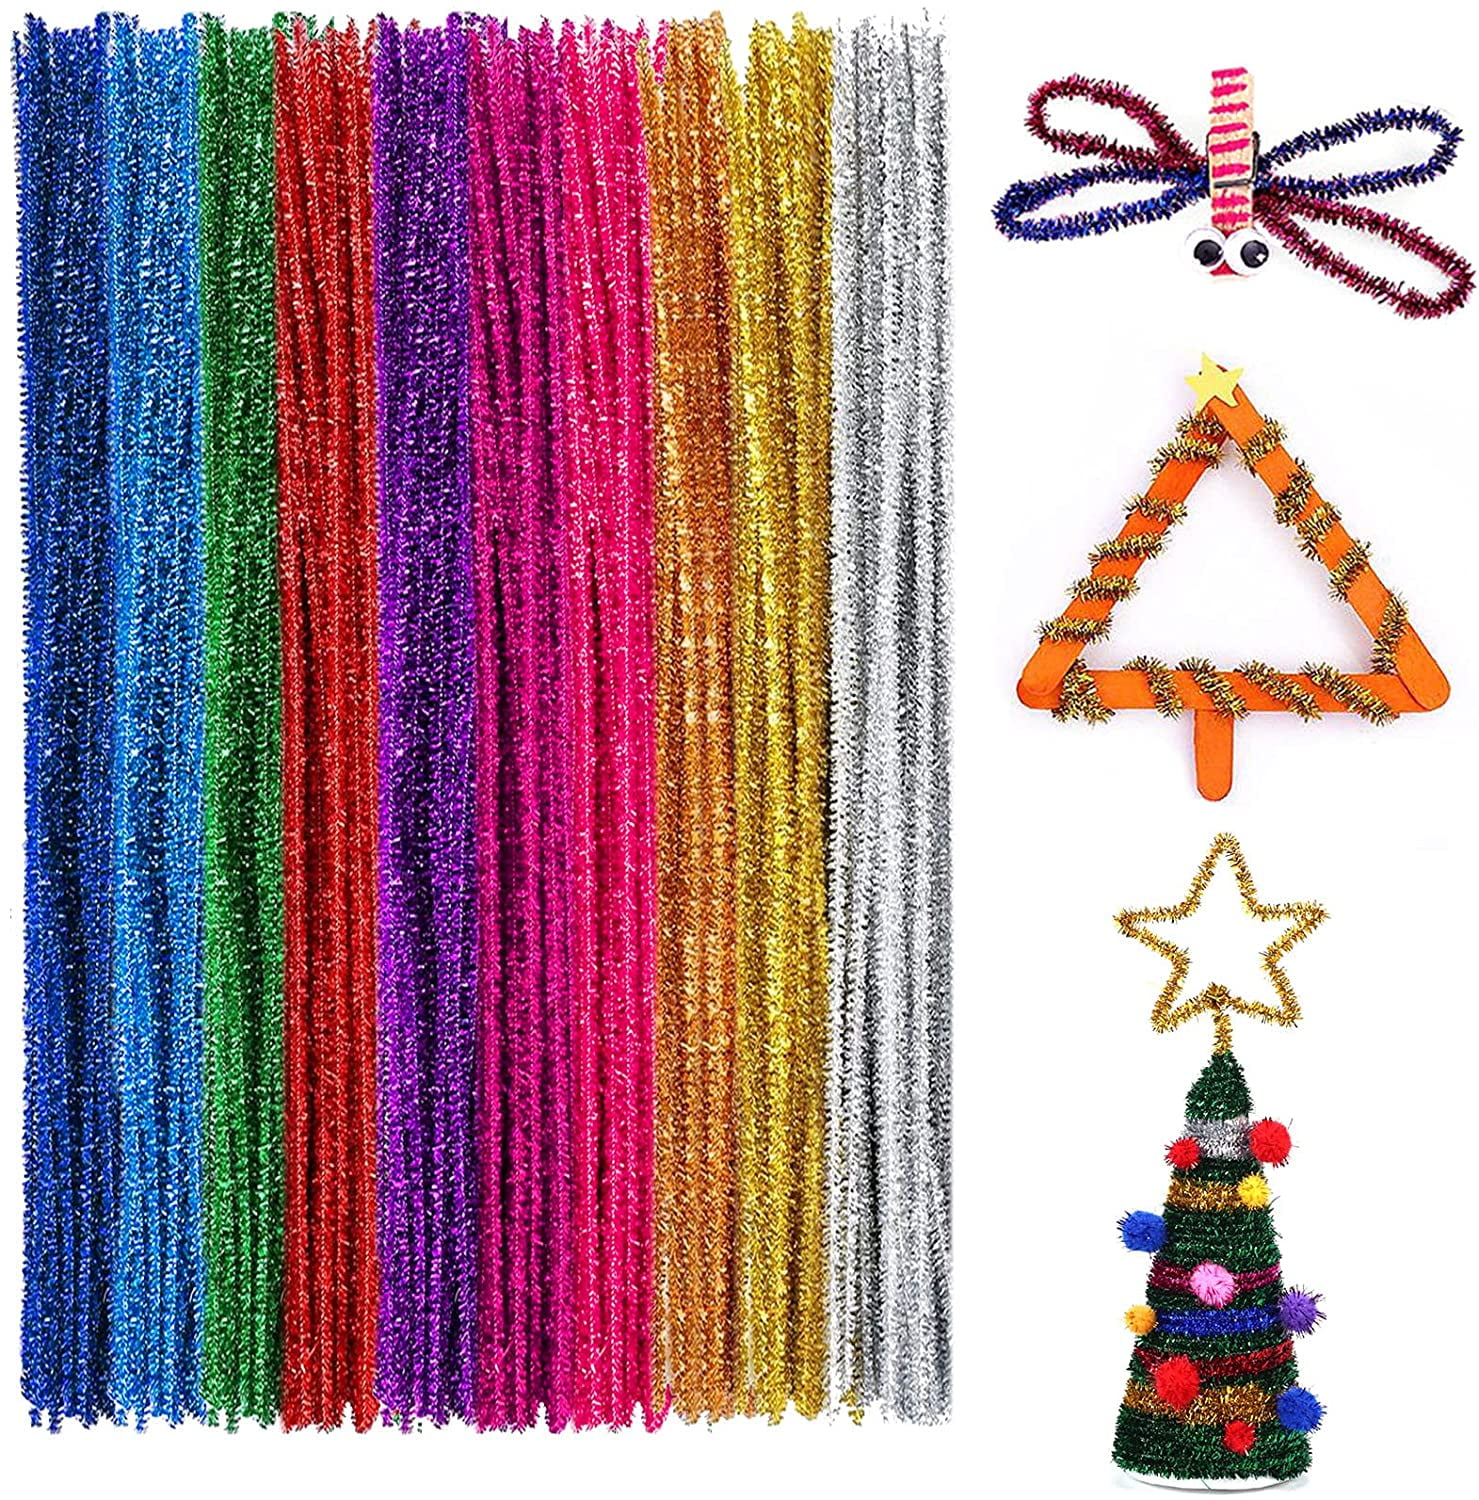 The Crafts Outlet Chenille Sparkly Stems, Pipe Cleaner, 12-in (30-cm),  10-pc, Silver